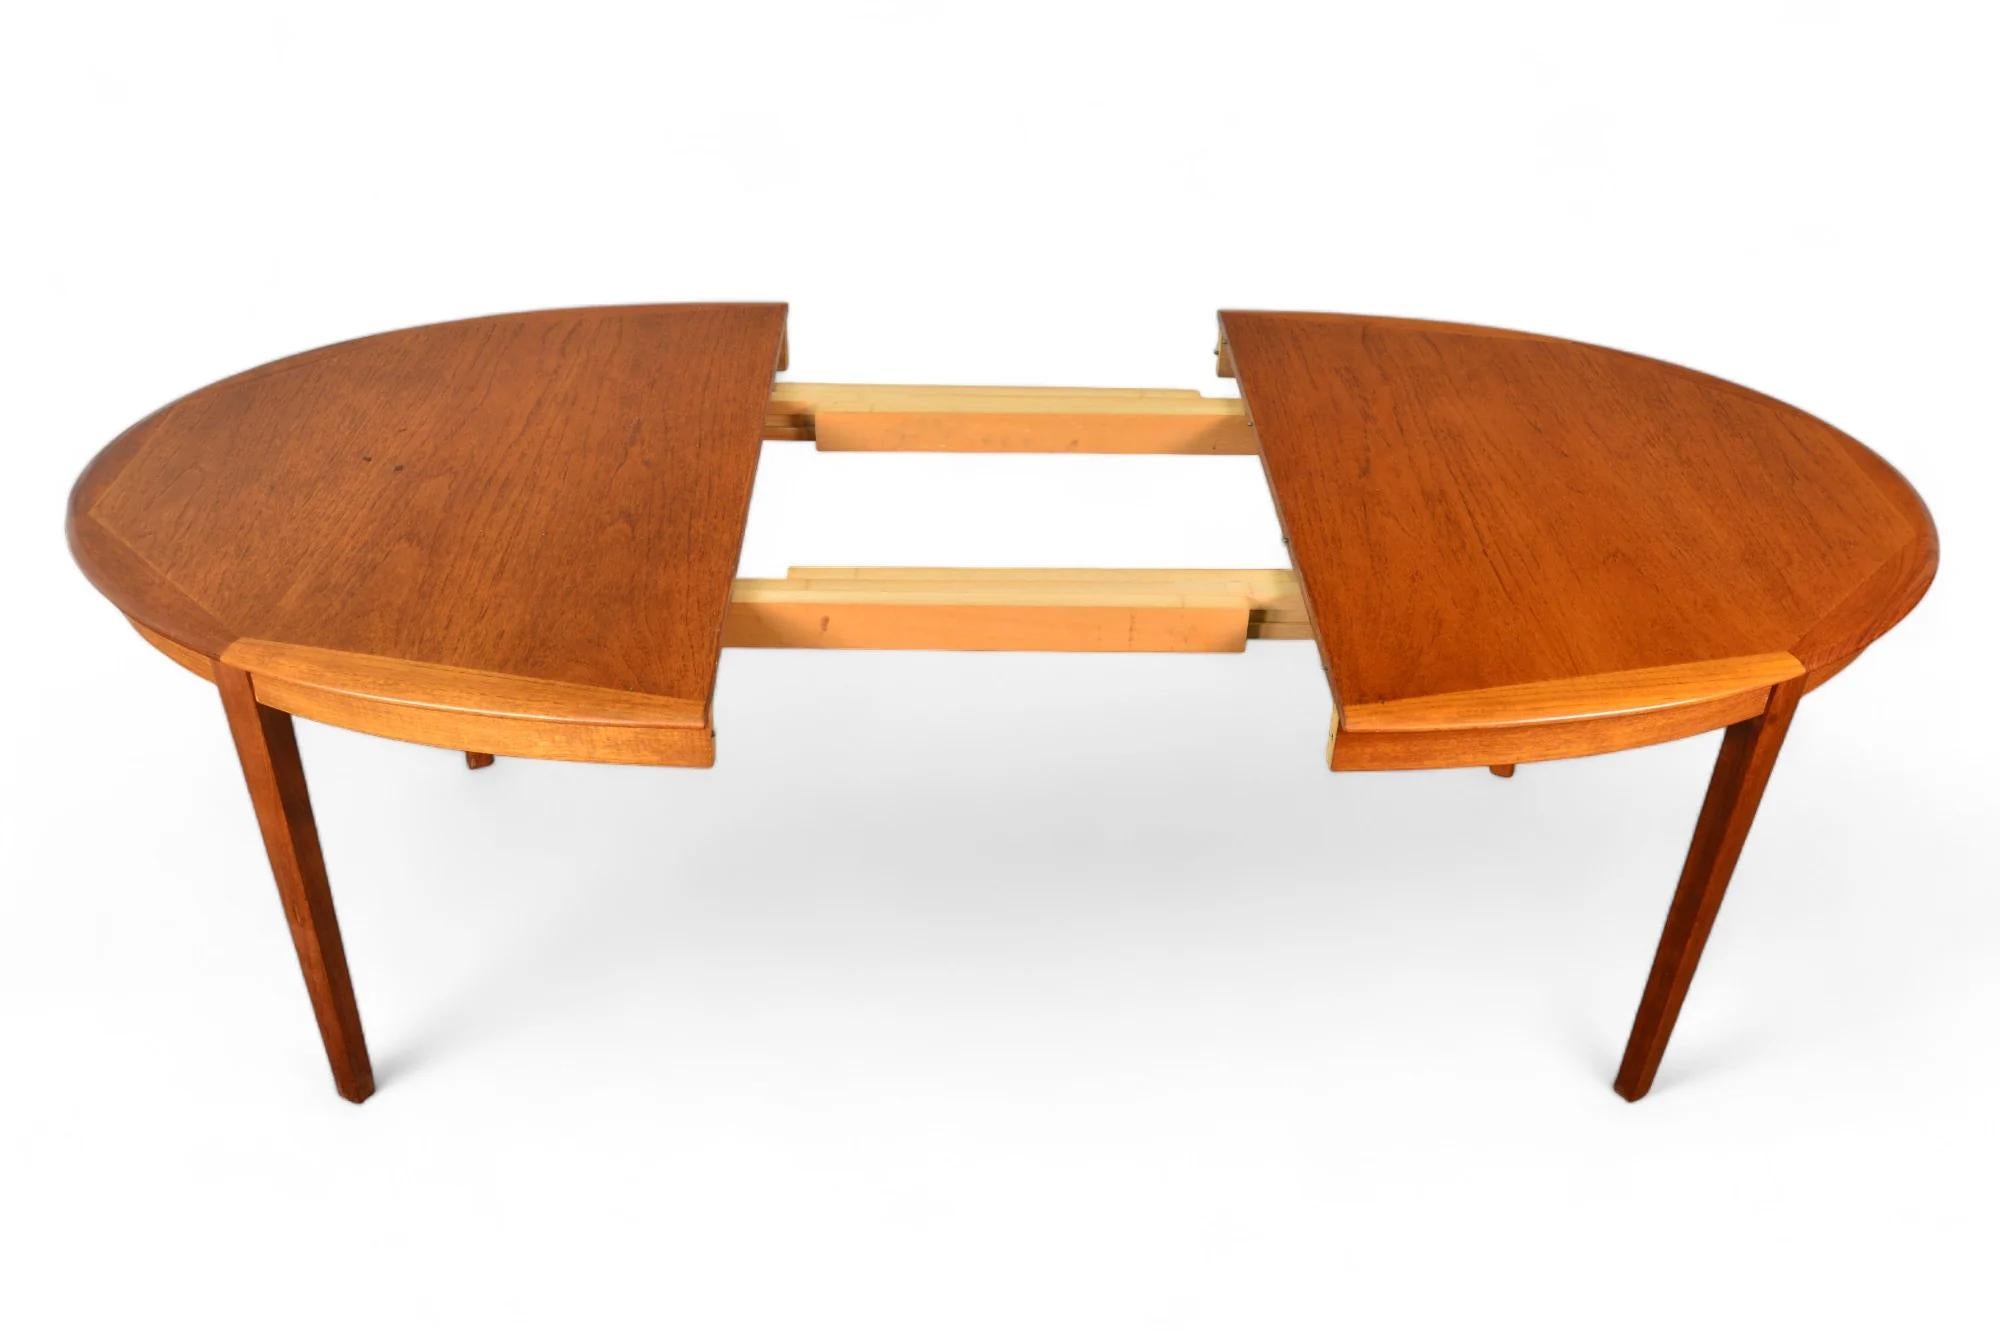 20th Century Danish Modern Oval Teak Dining Table + Two Leaves By Byrlund For Sale